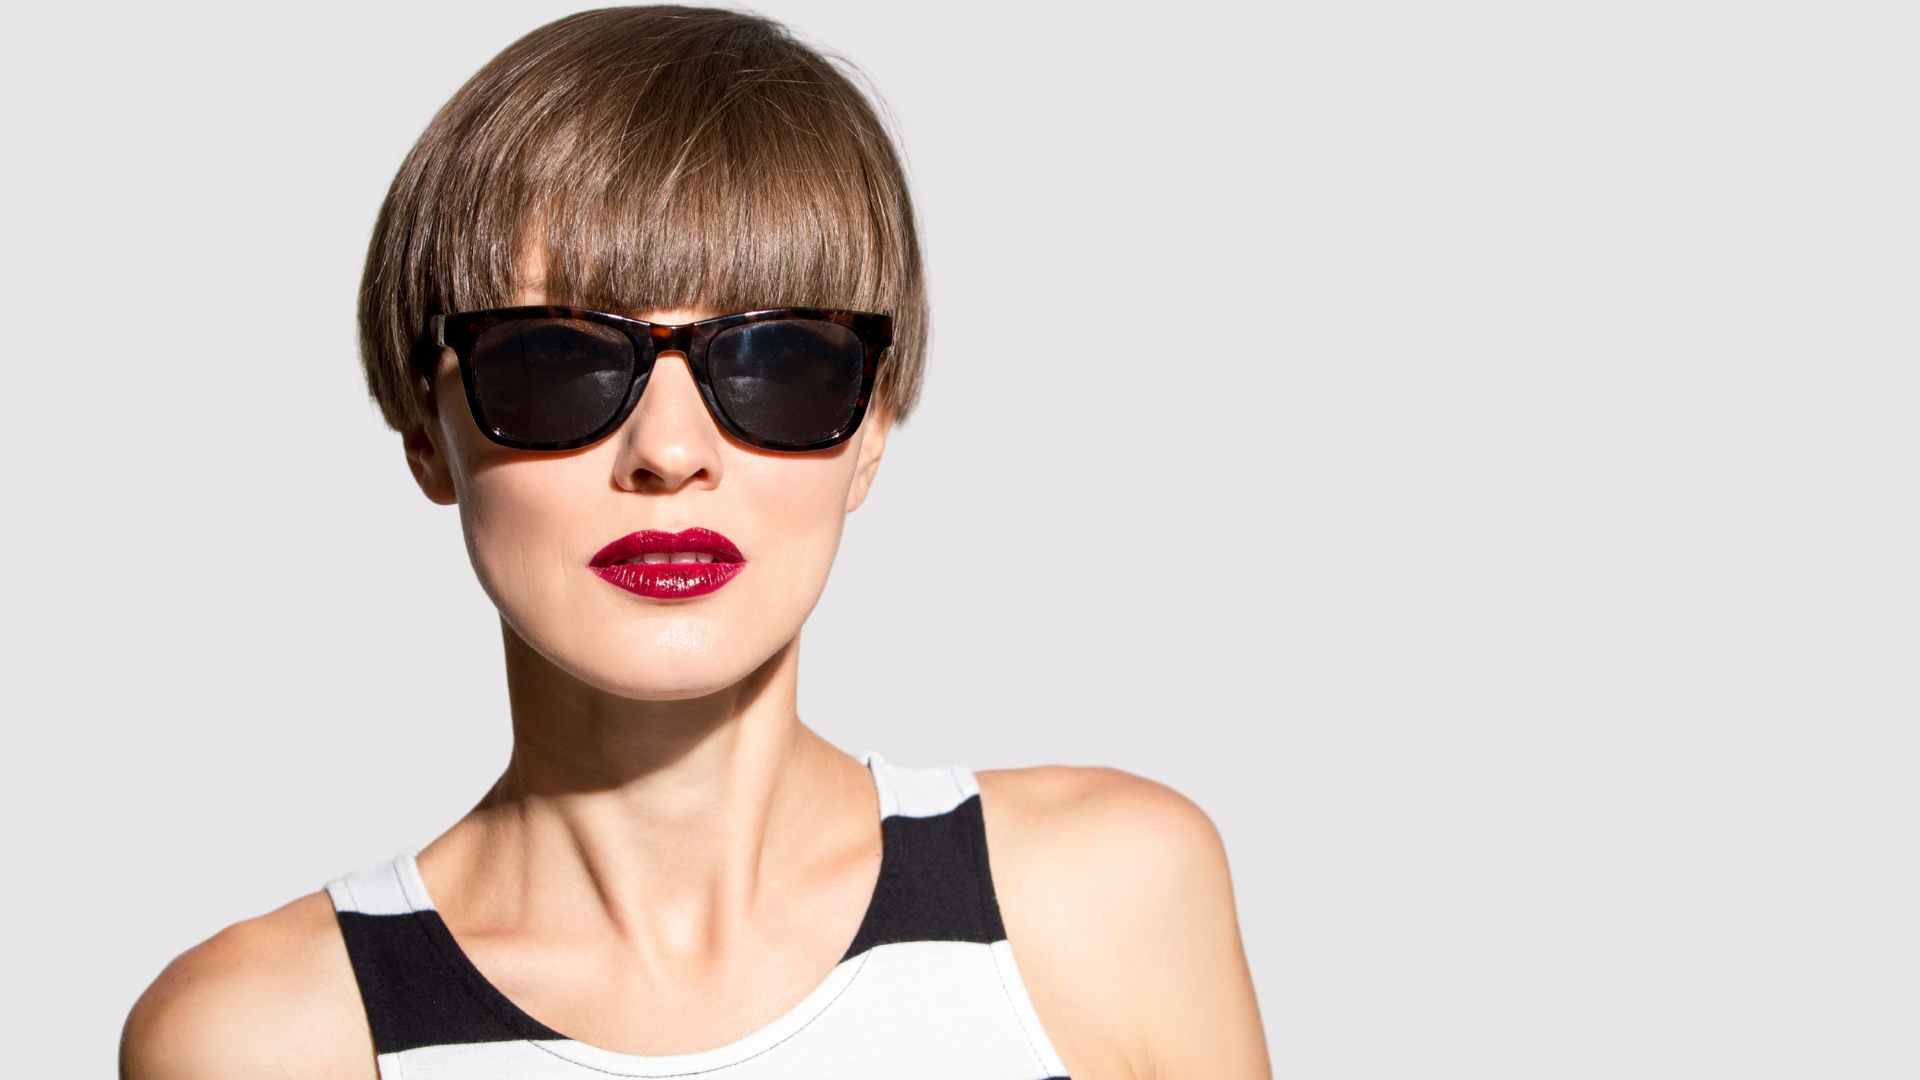 Female model with brown, shiny fine hair. Wearing dark sunglasses, red lipstick and volume in the fringe.